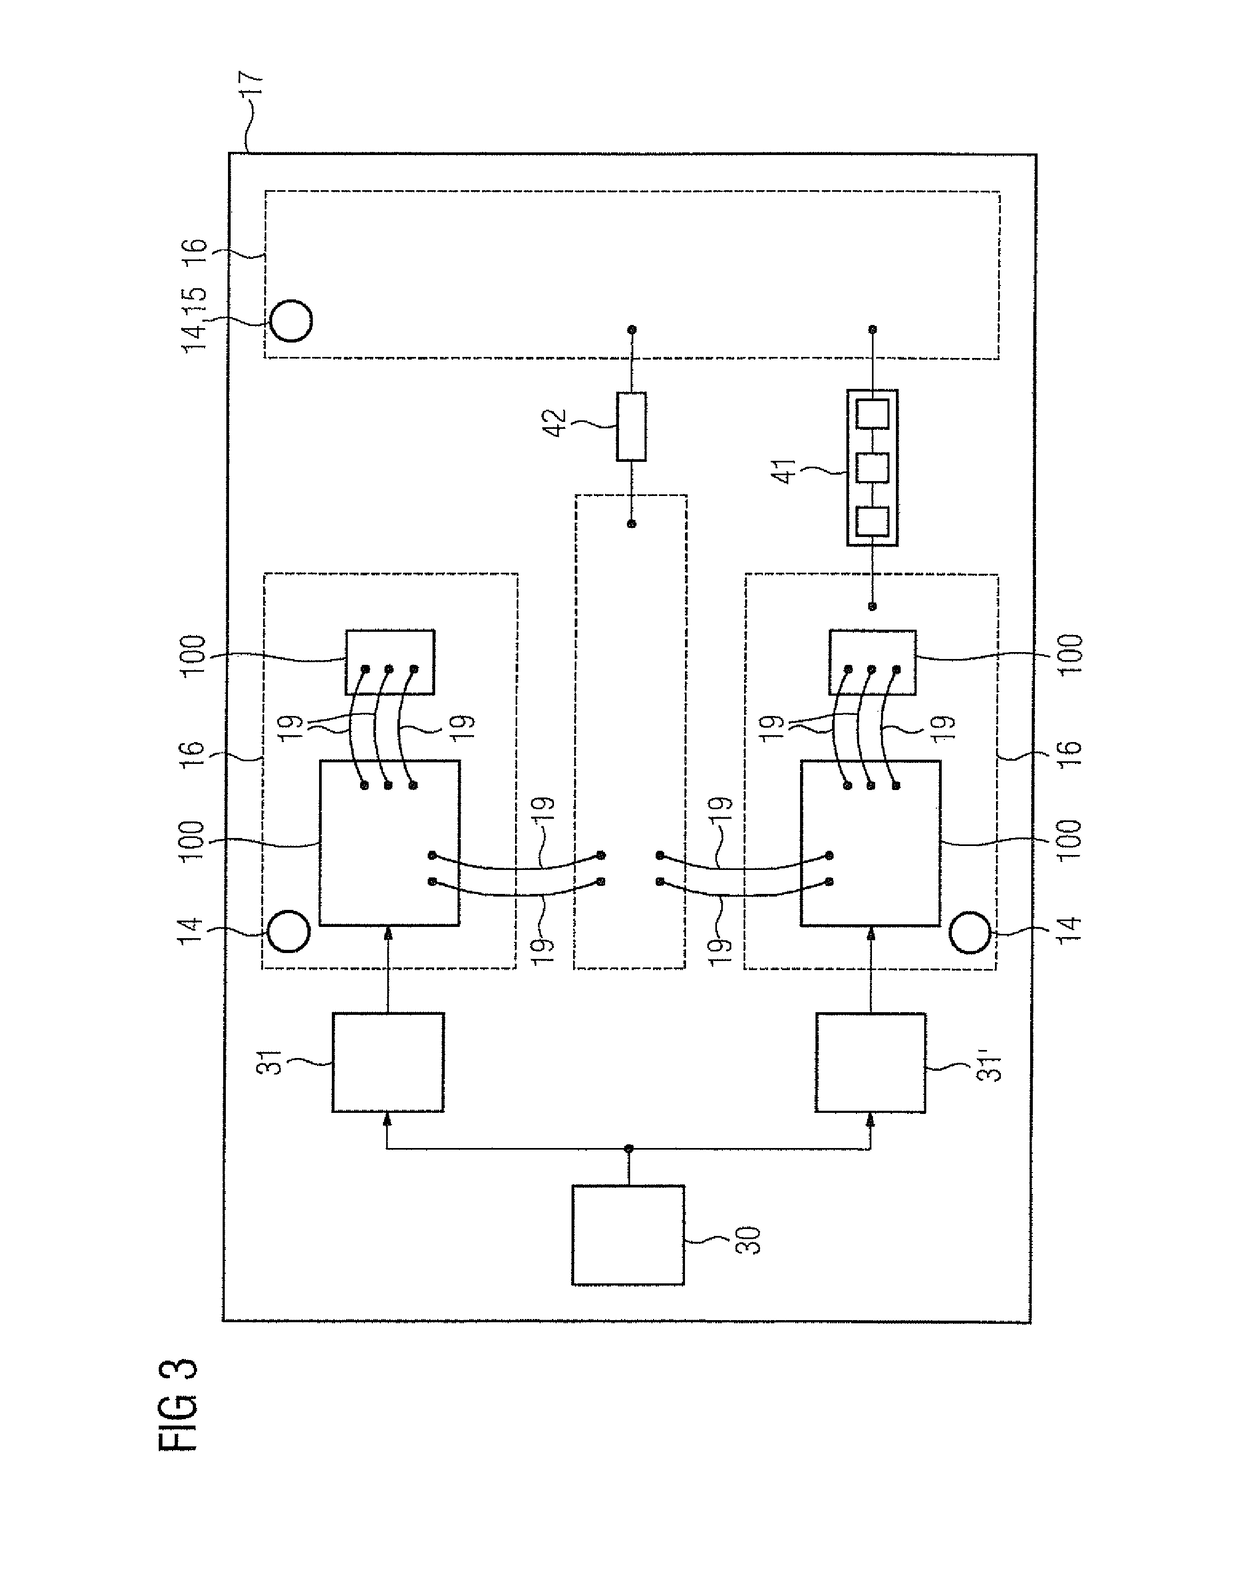 Phase module for a power converter